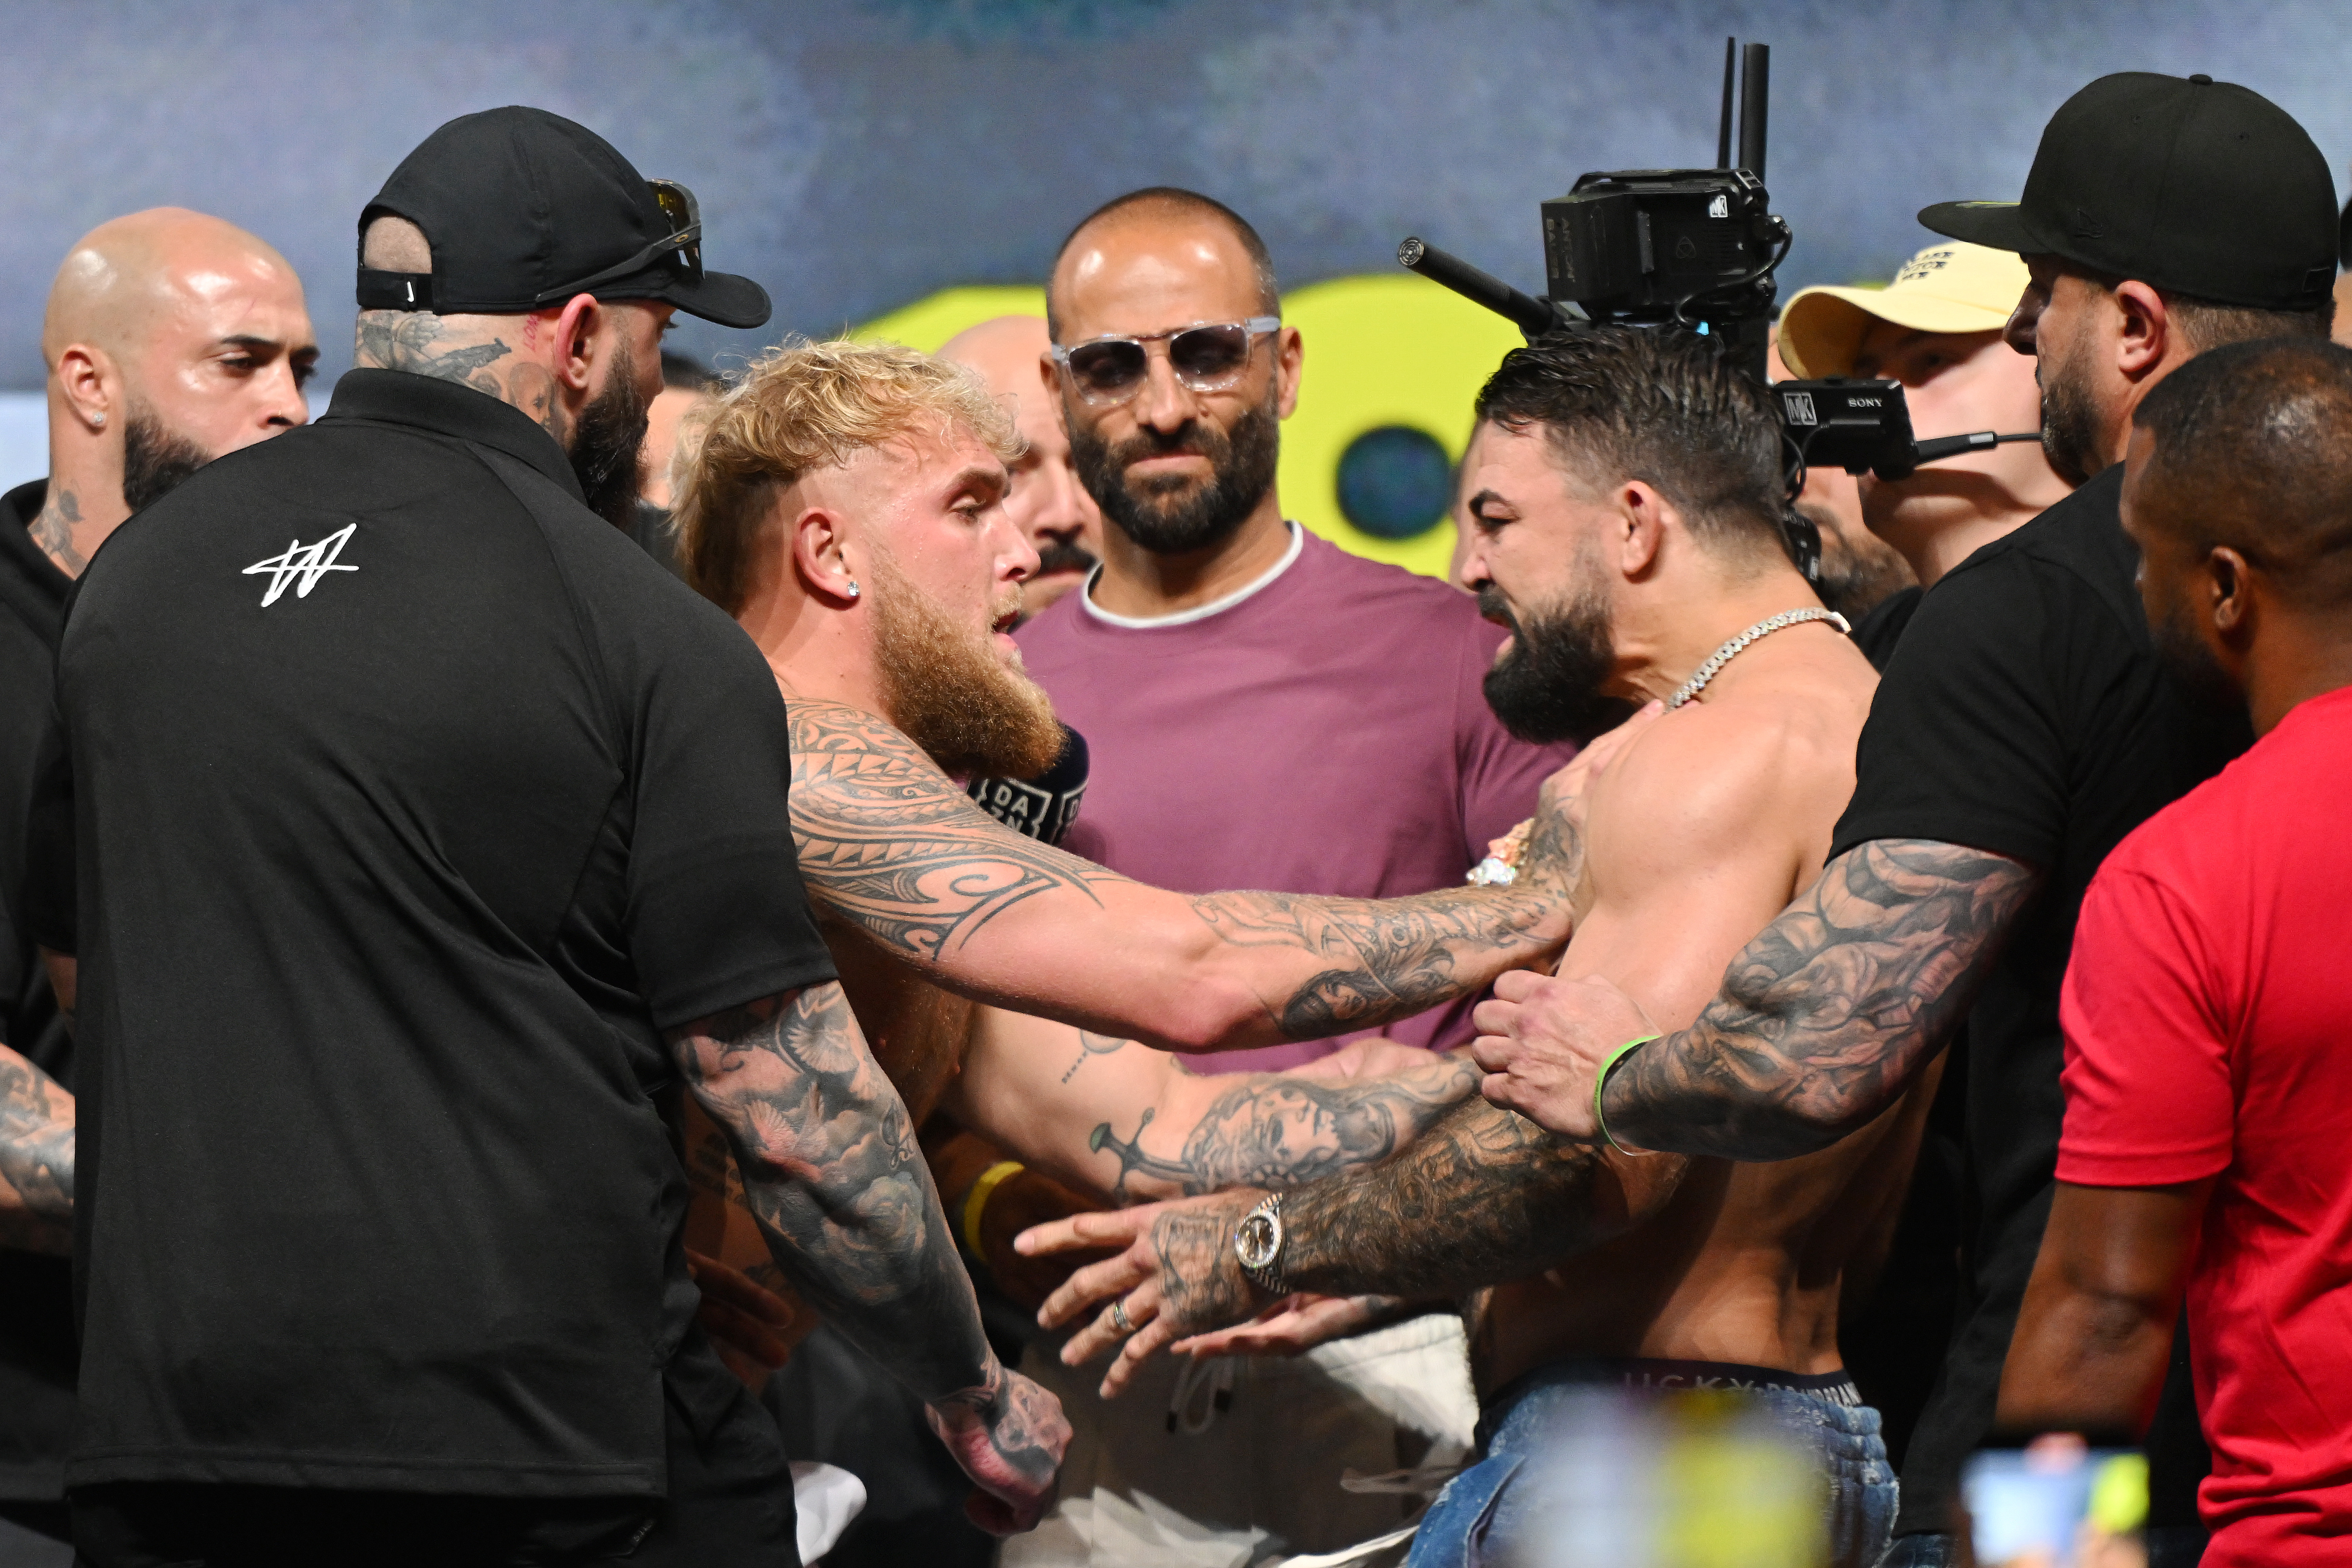 Fight fans weren't convinced by the argy-bargy that took place